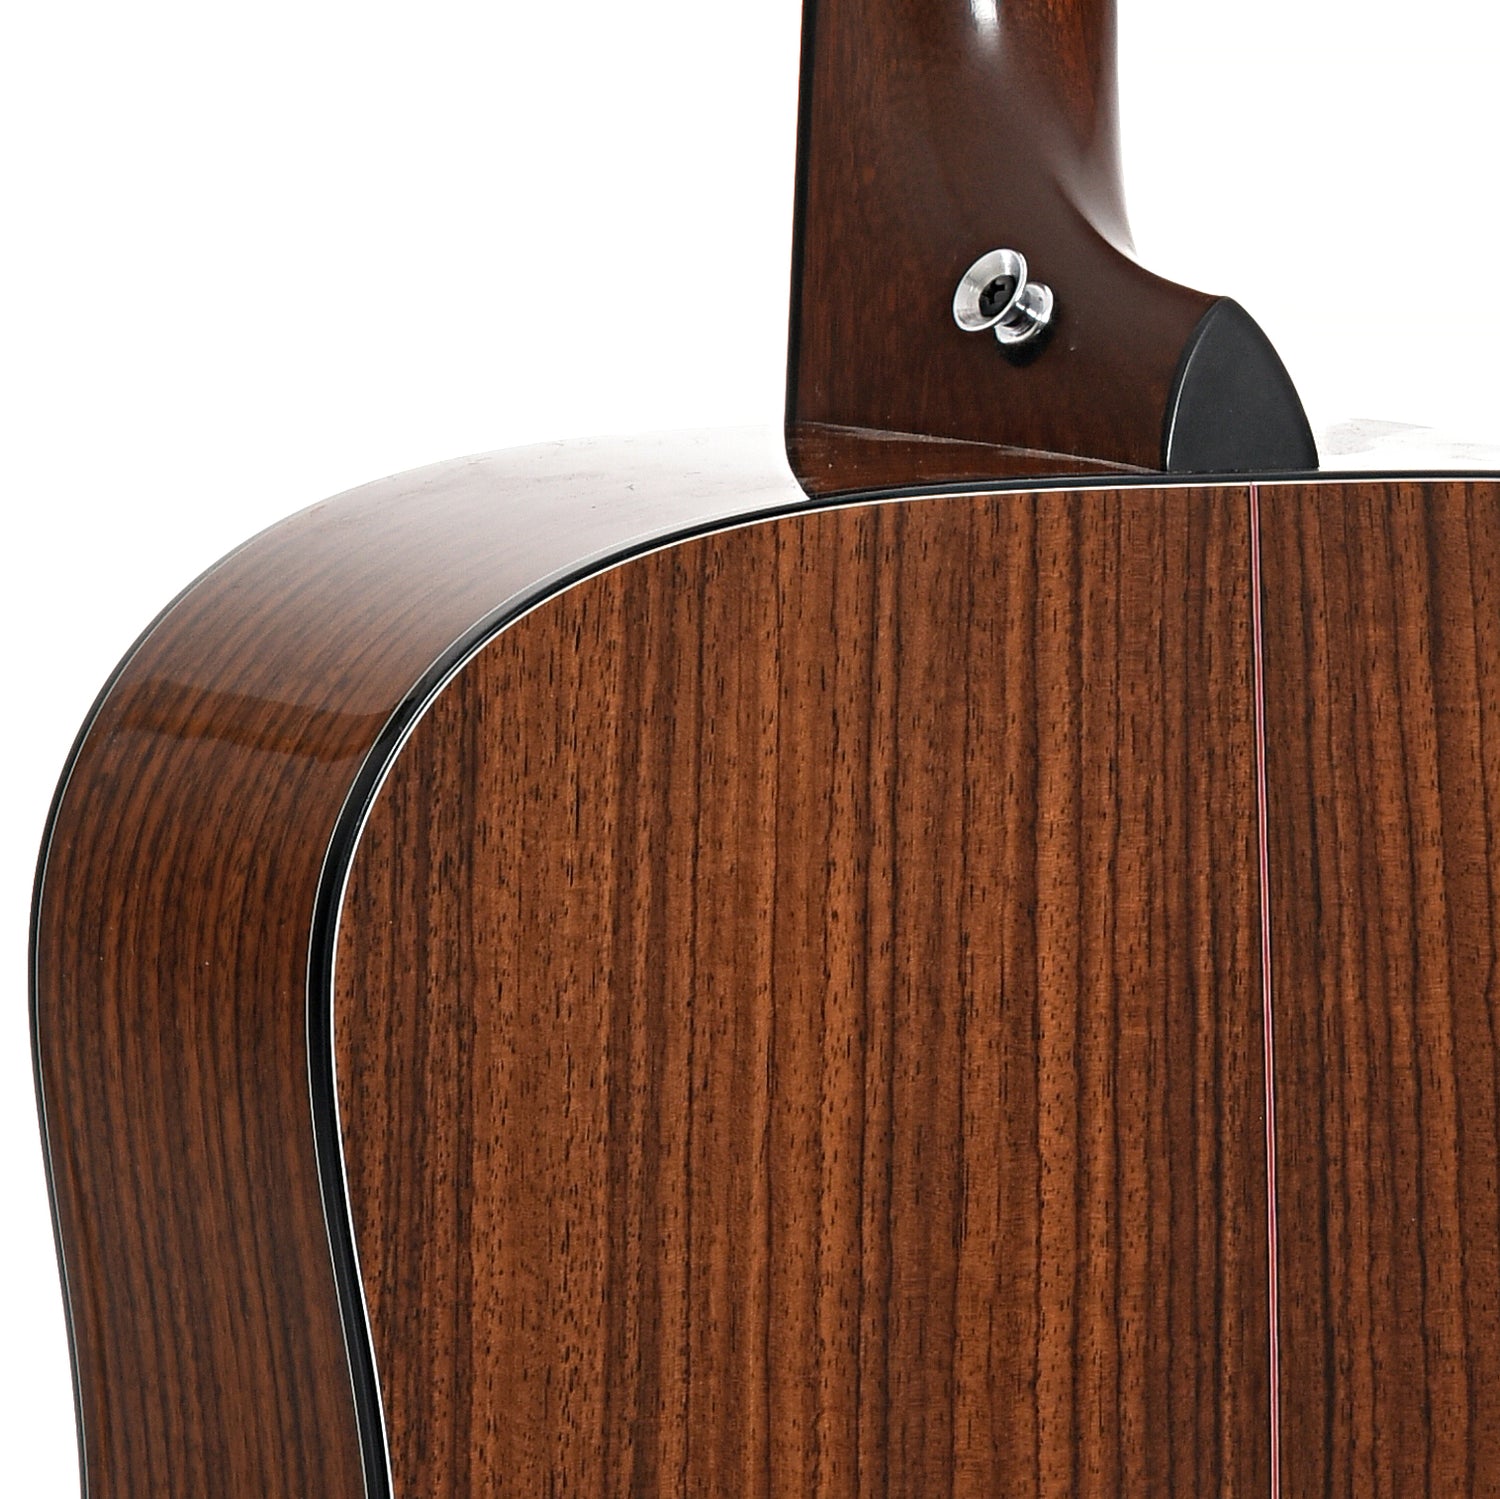 Heel of Taylor 710 Acoustic